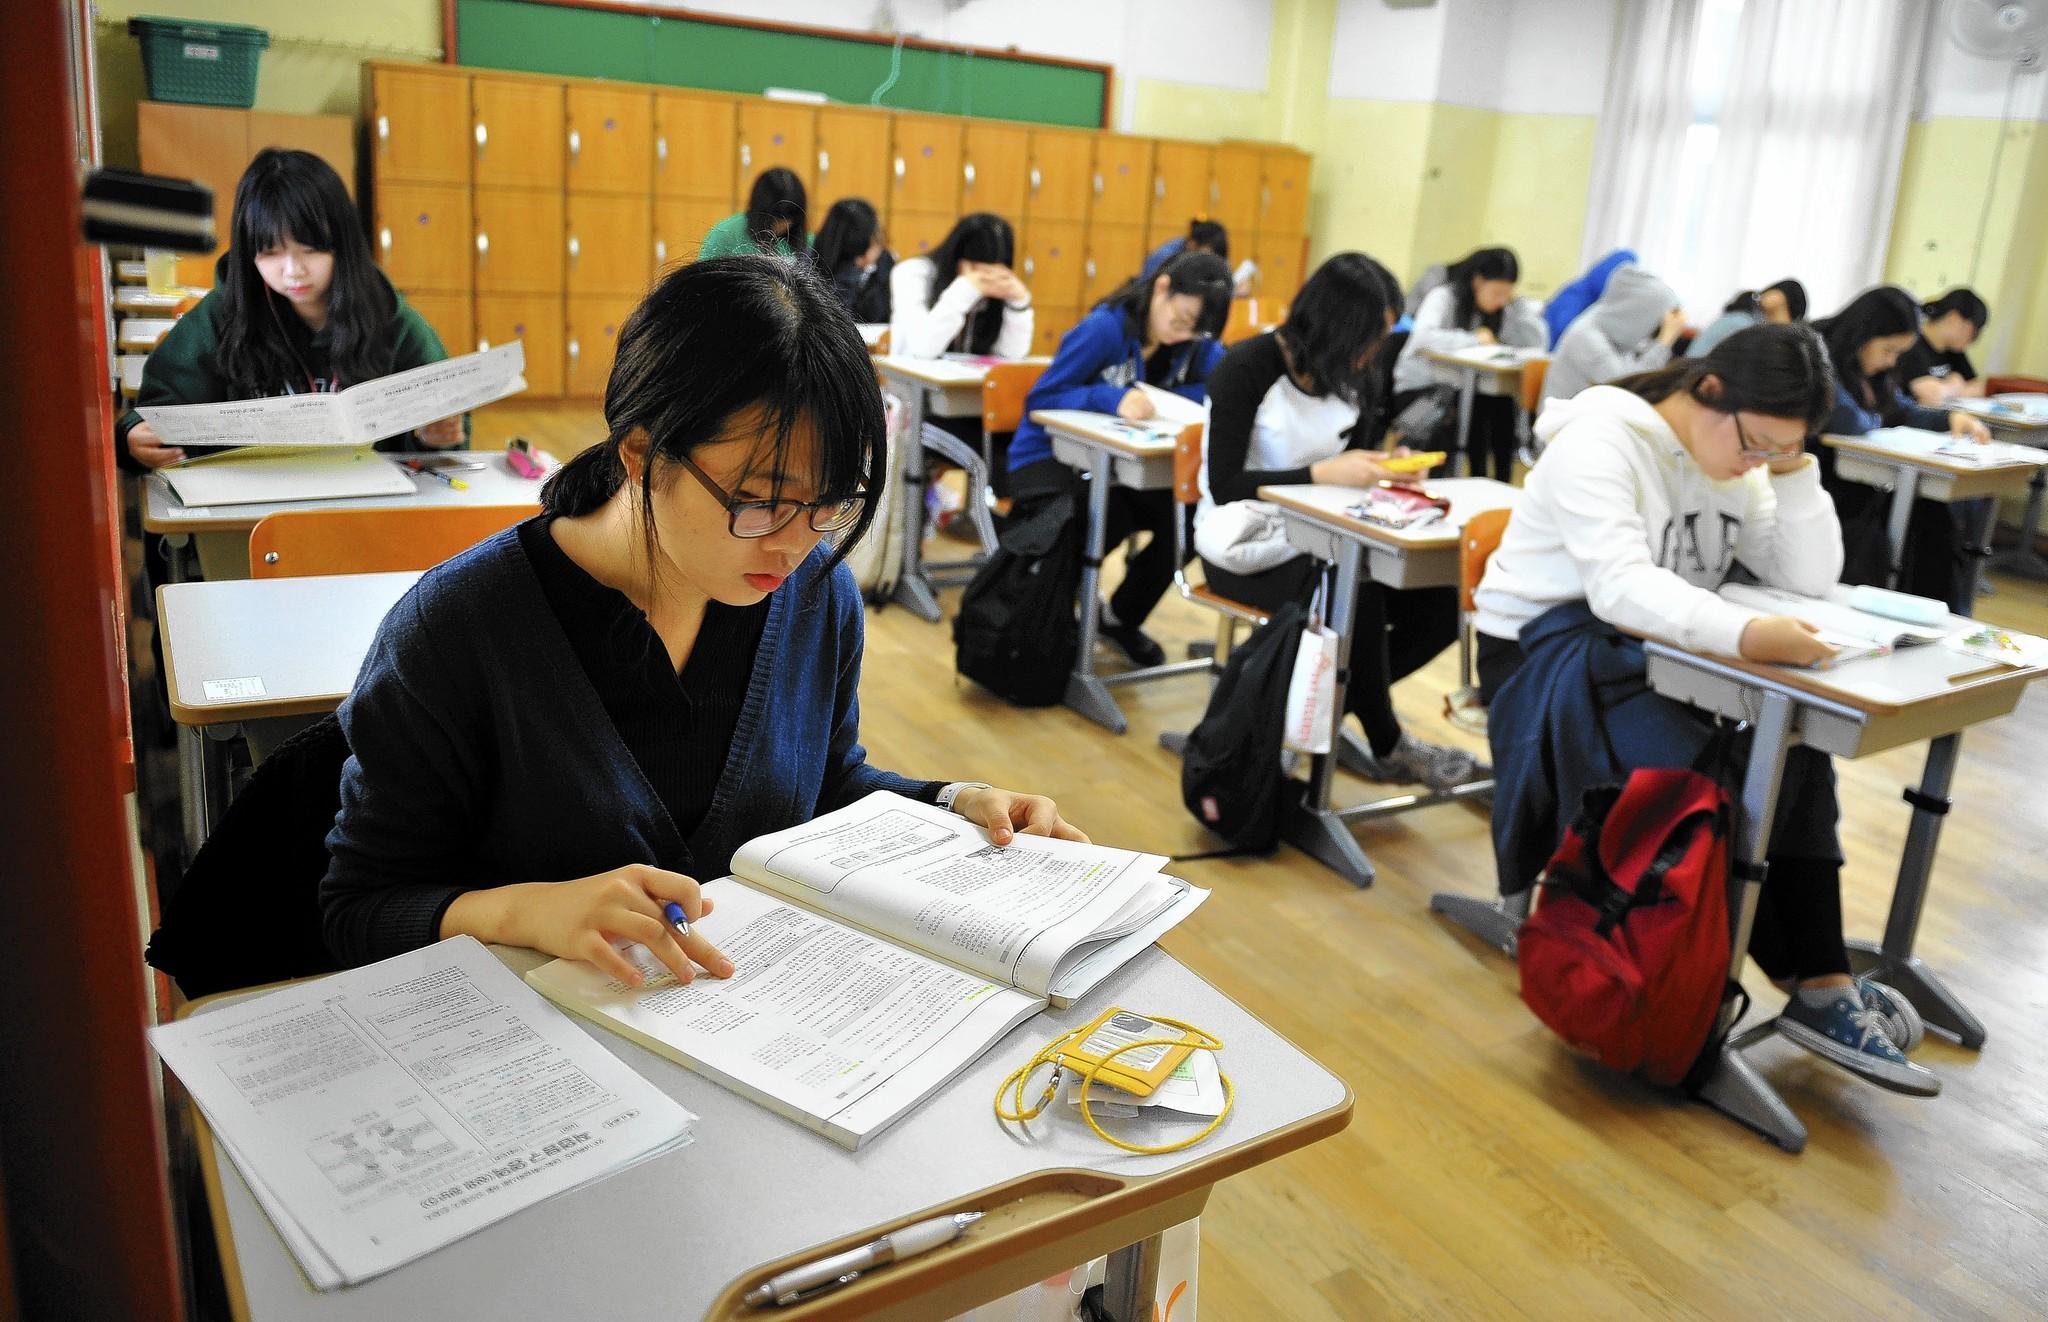 Which school should I choose to study in Korea for pedagogy?